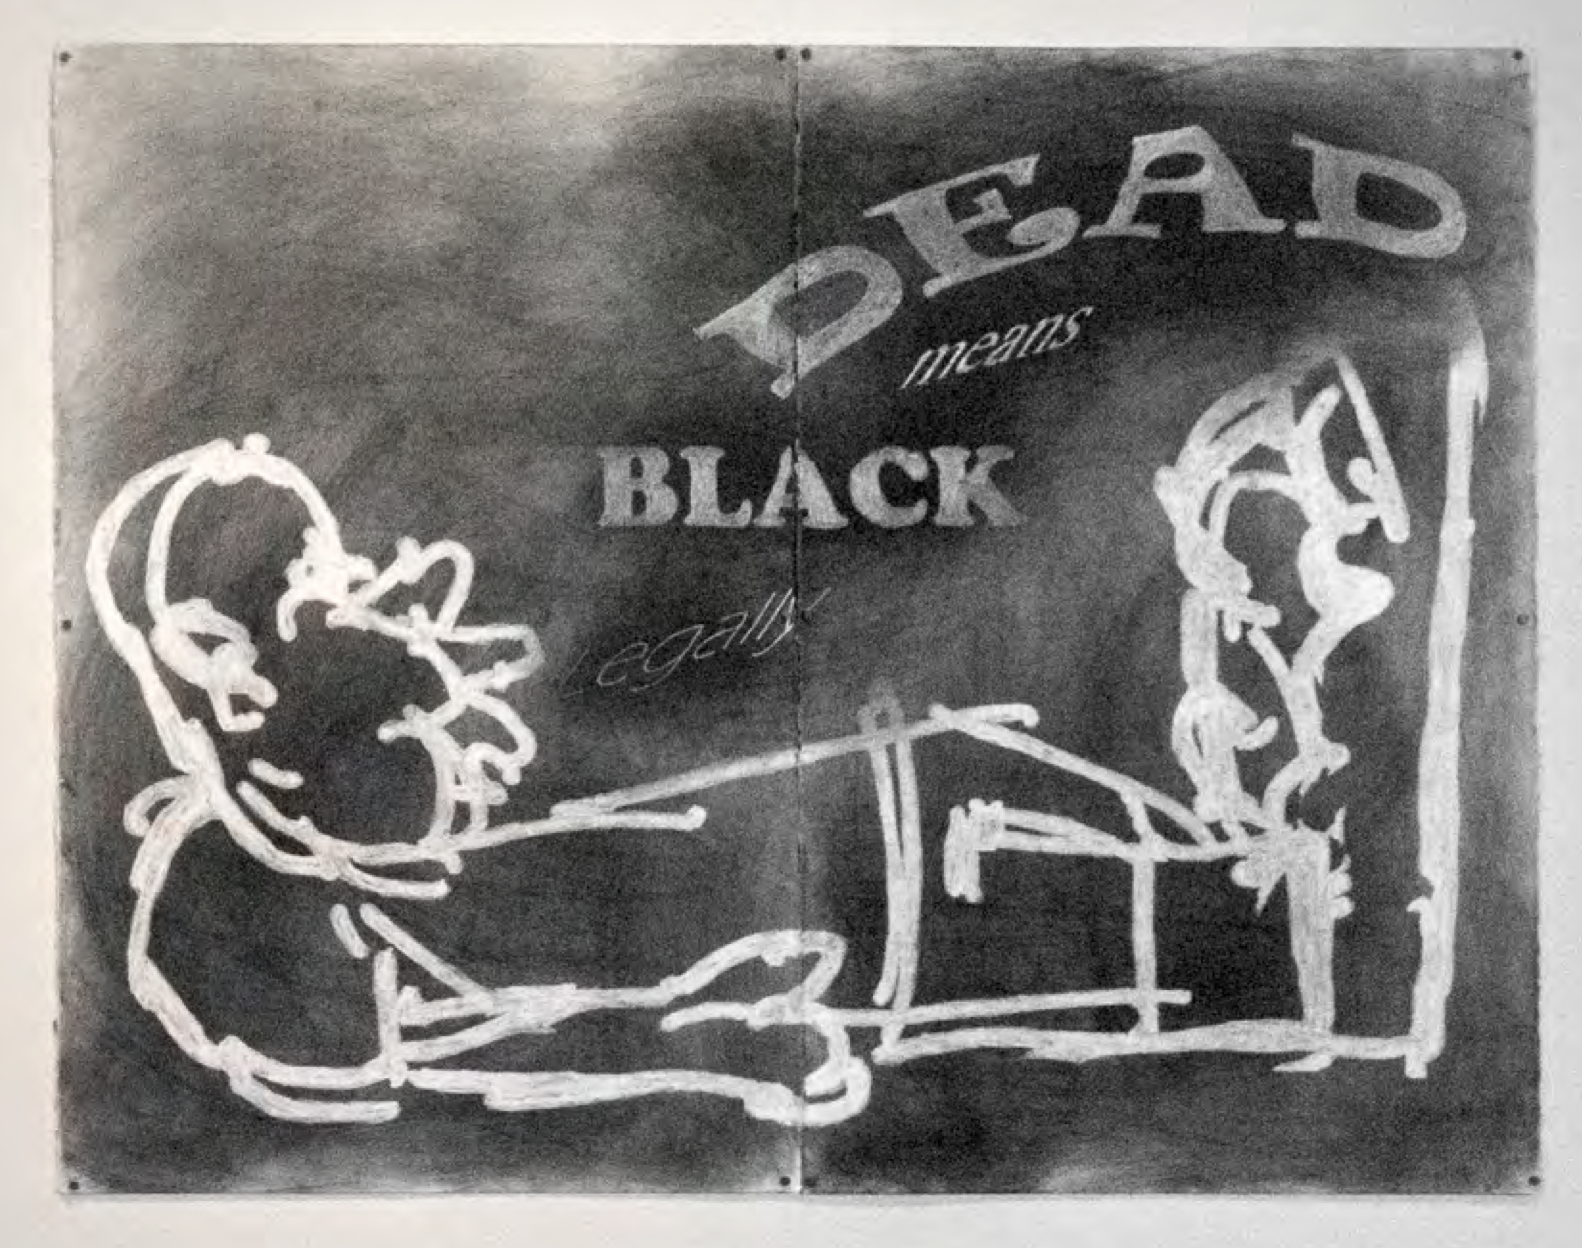 Image of Elliott Jamal Robbins’ A La Petite Mort, grey graphite drawing on beige paper. The words dead means black legally can be read above an indiscernible image of a figure.